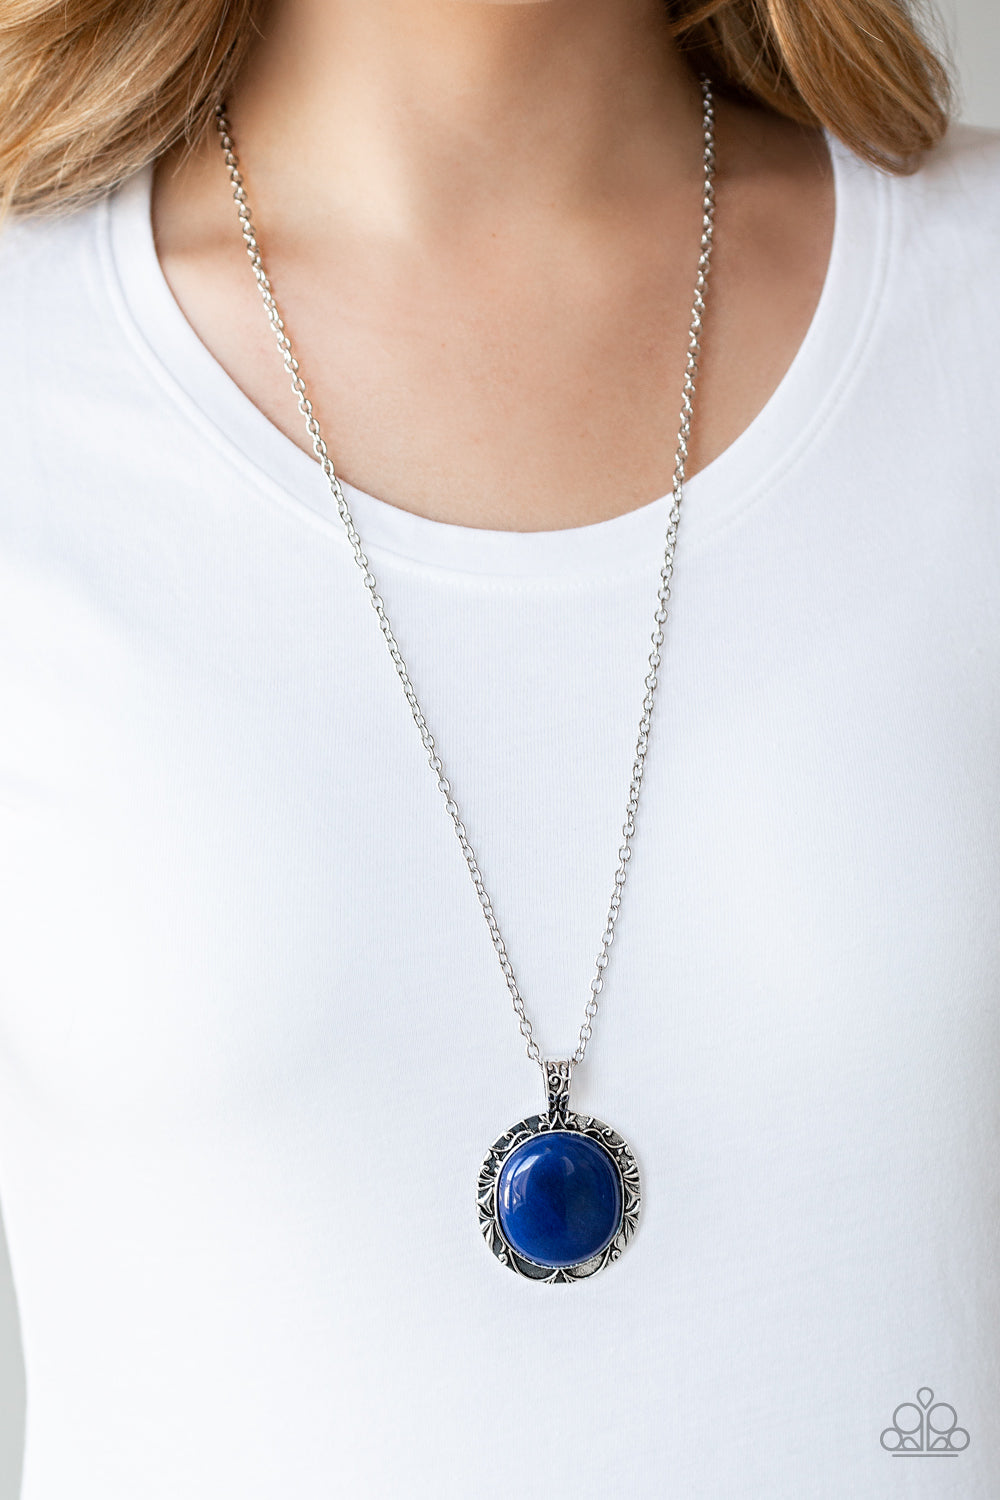 Stone Aura Blue Moonstone Necklace Paparazzi Accessories. Get Free Shipping. 